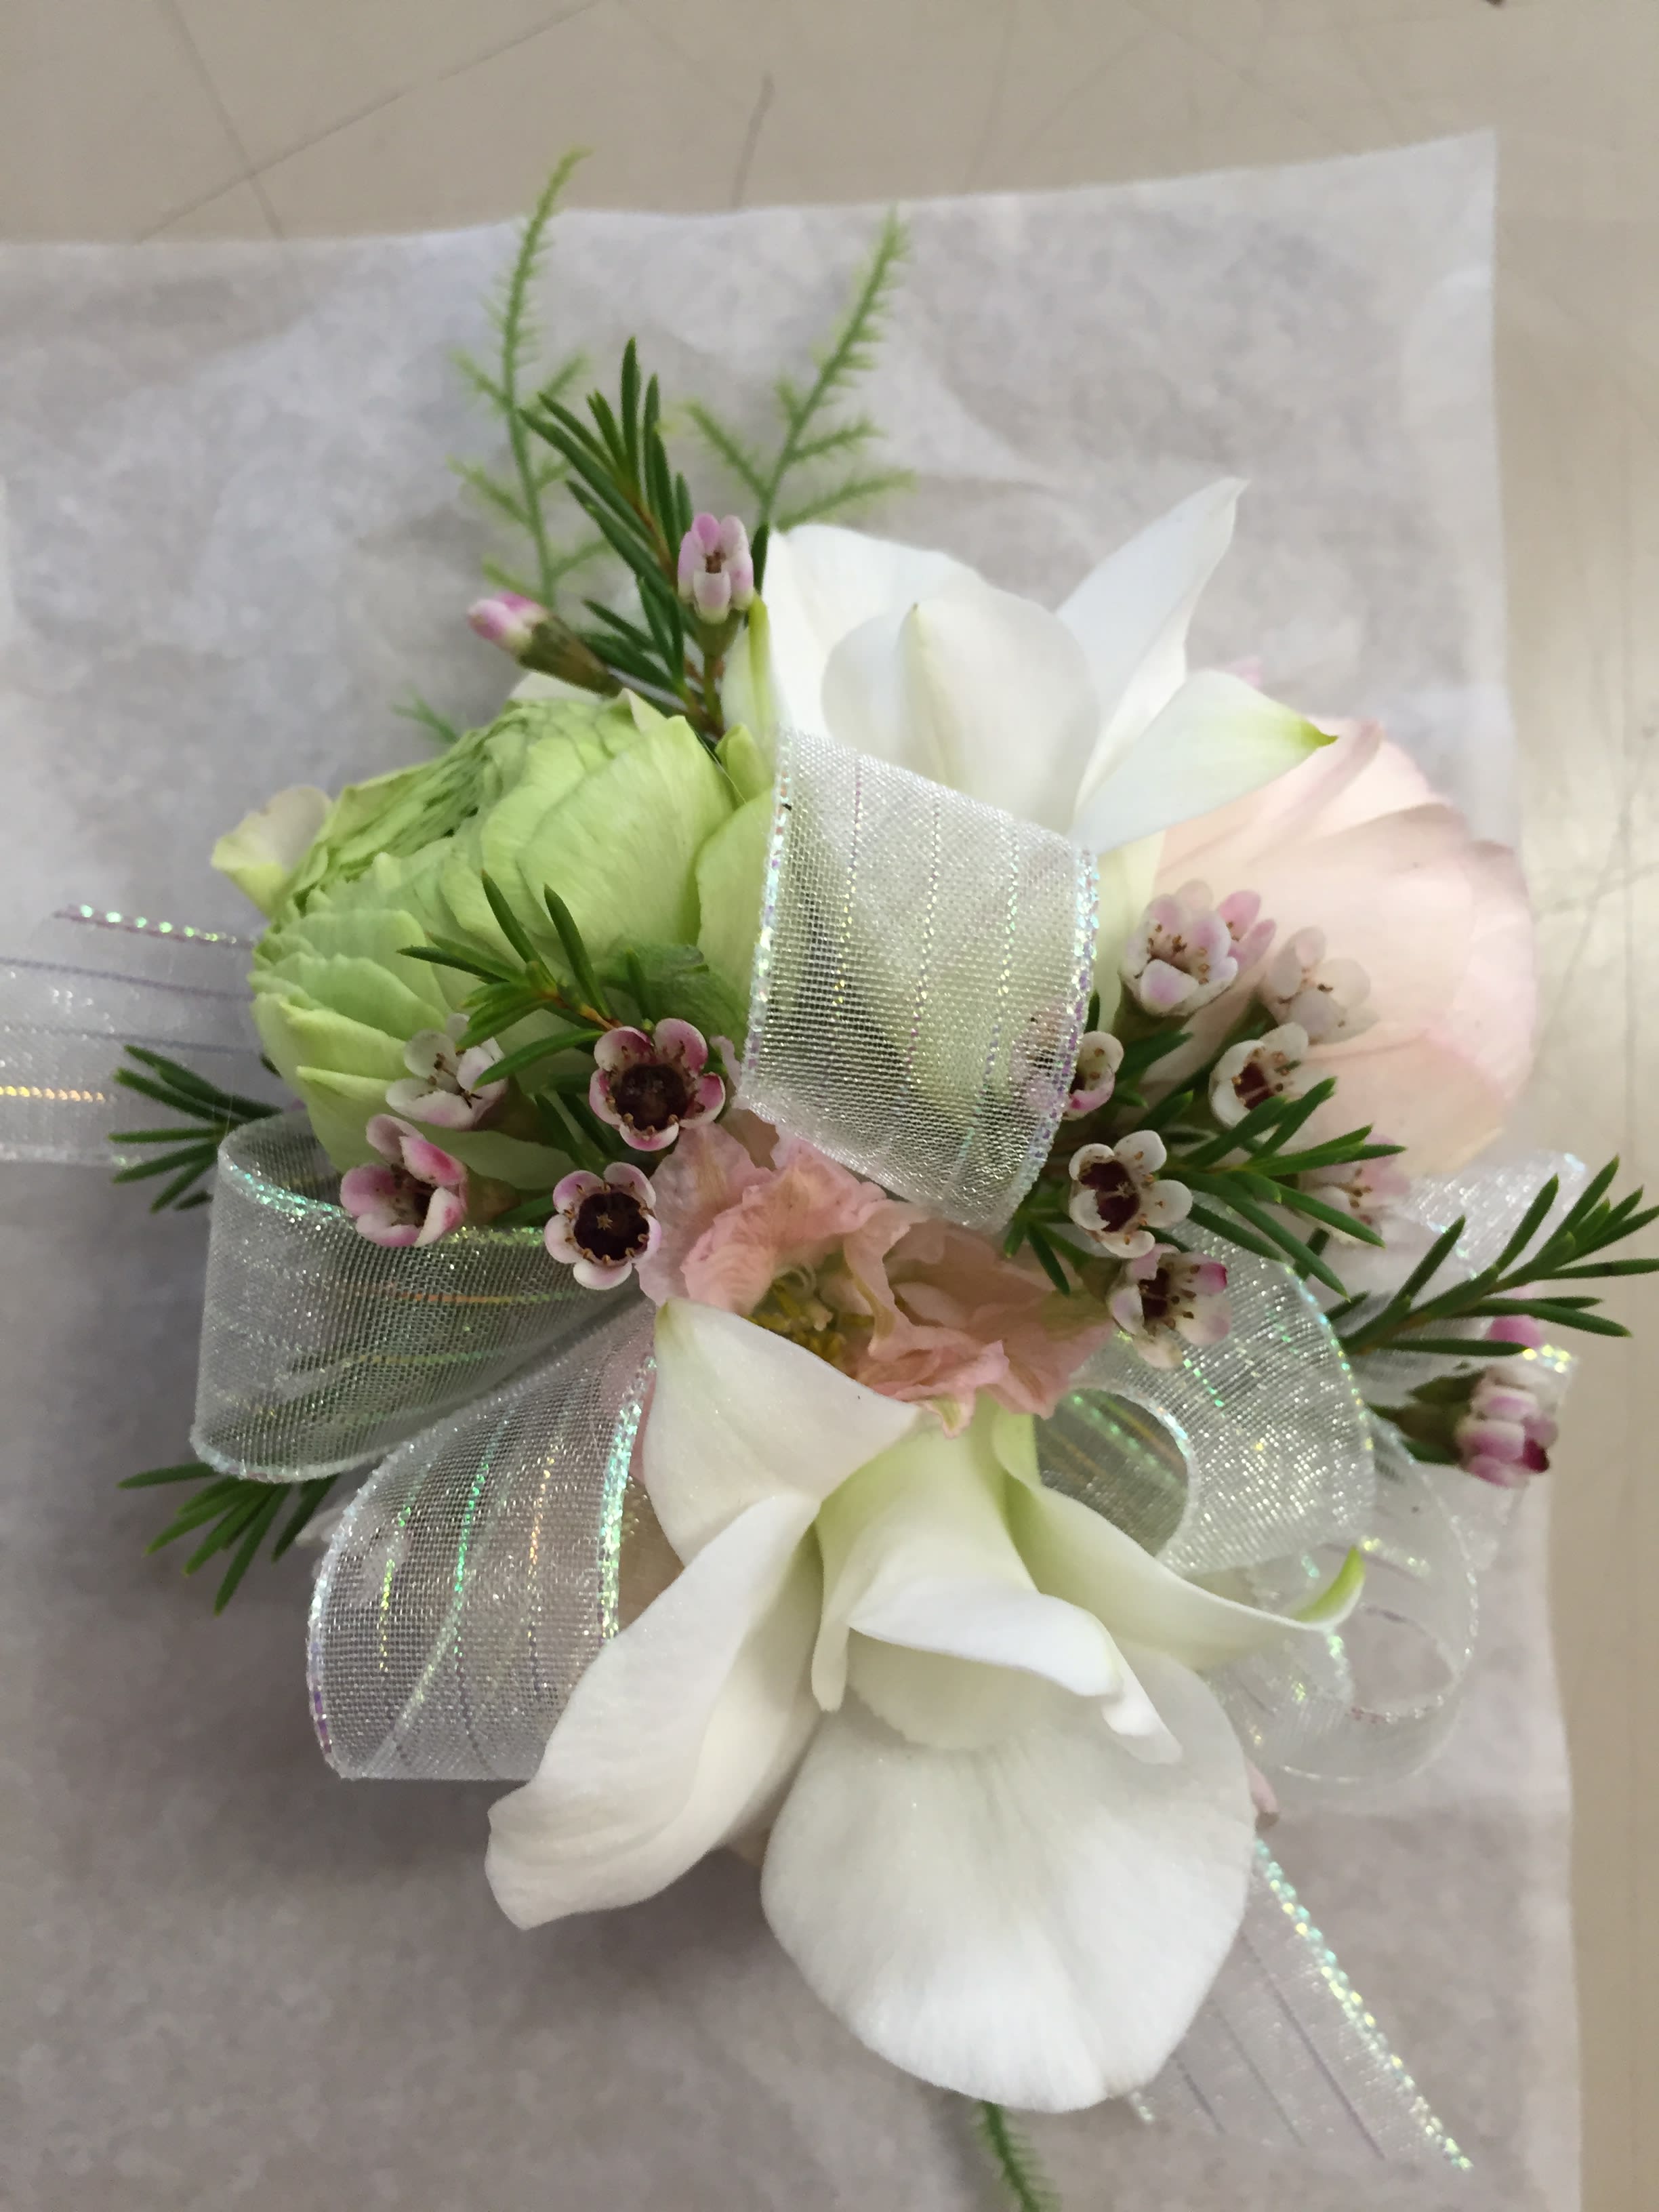 Custom Corsage - We can do custom orders to match the dress and tux! Here are a few of our past examples.